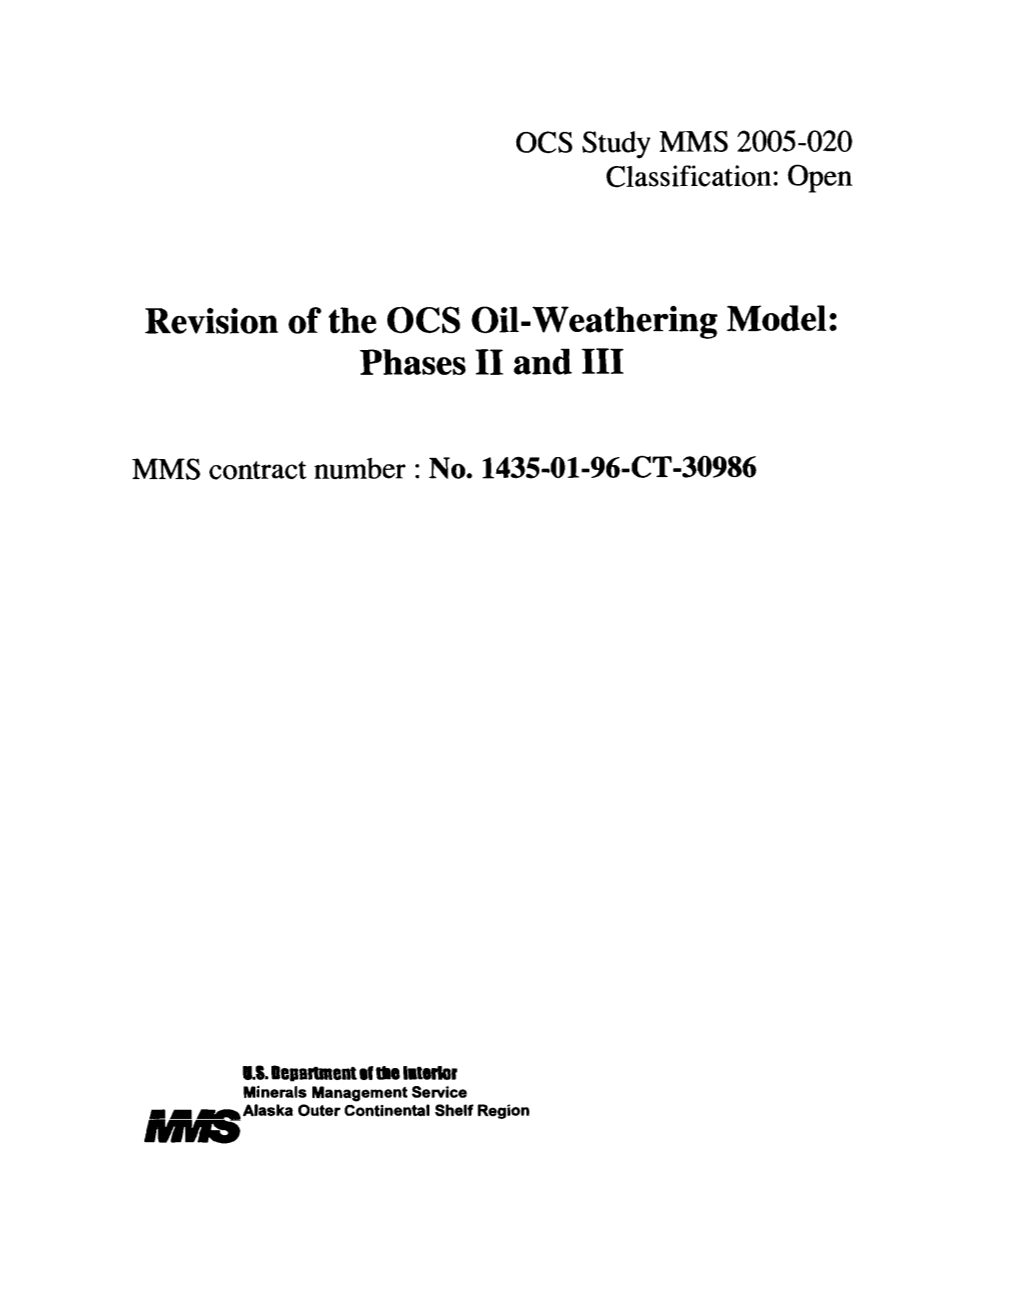 Revision of the OCS Oil-Weathering Model: Phases I1 and I11